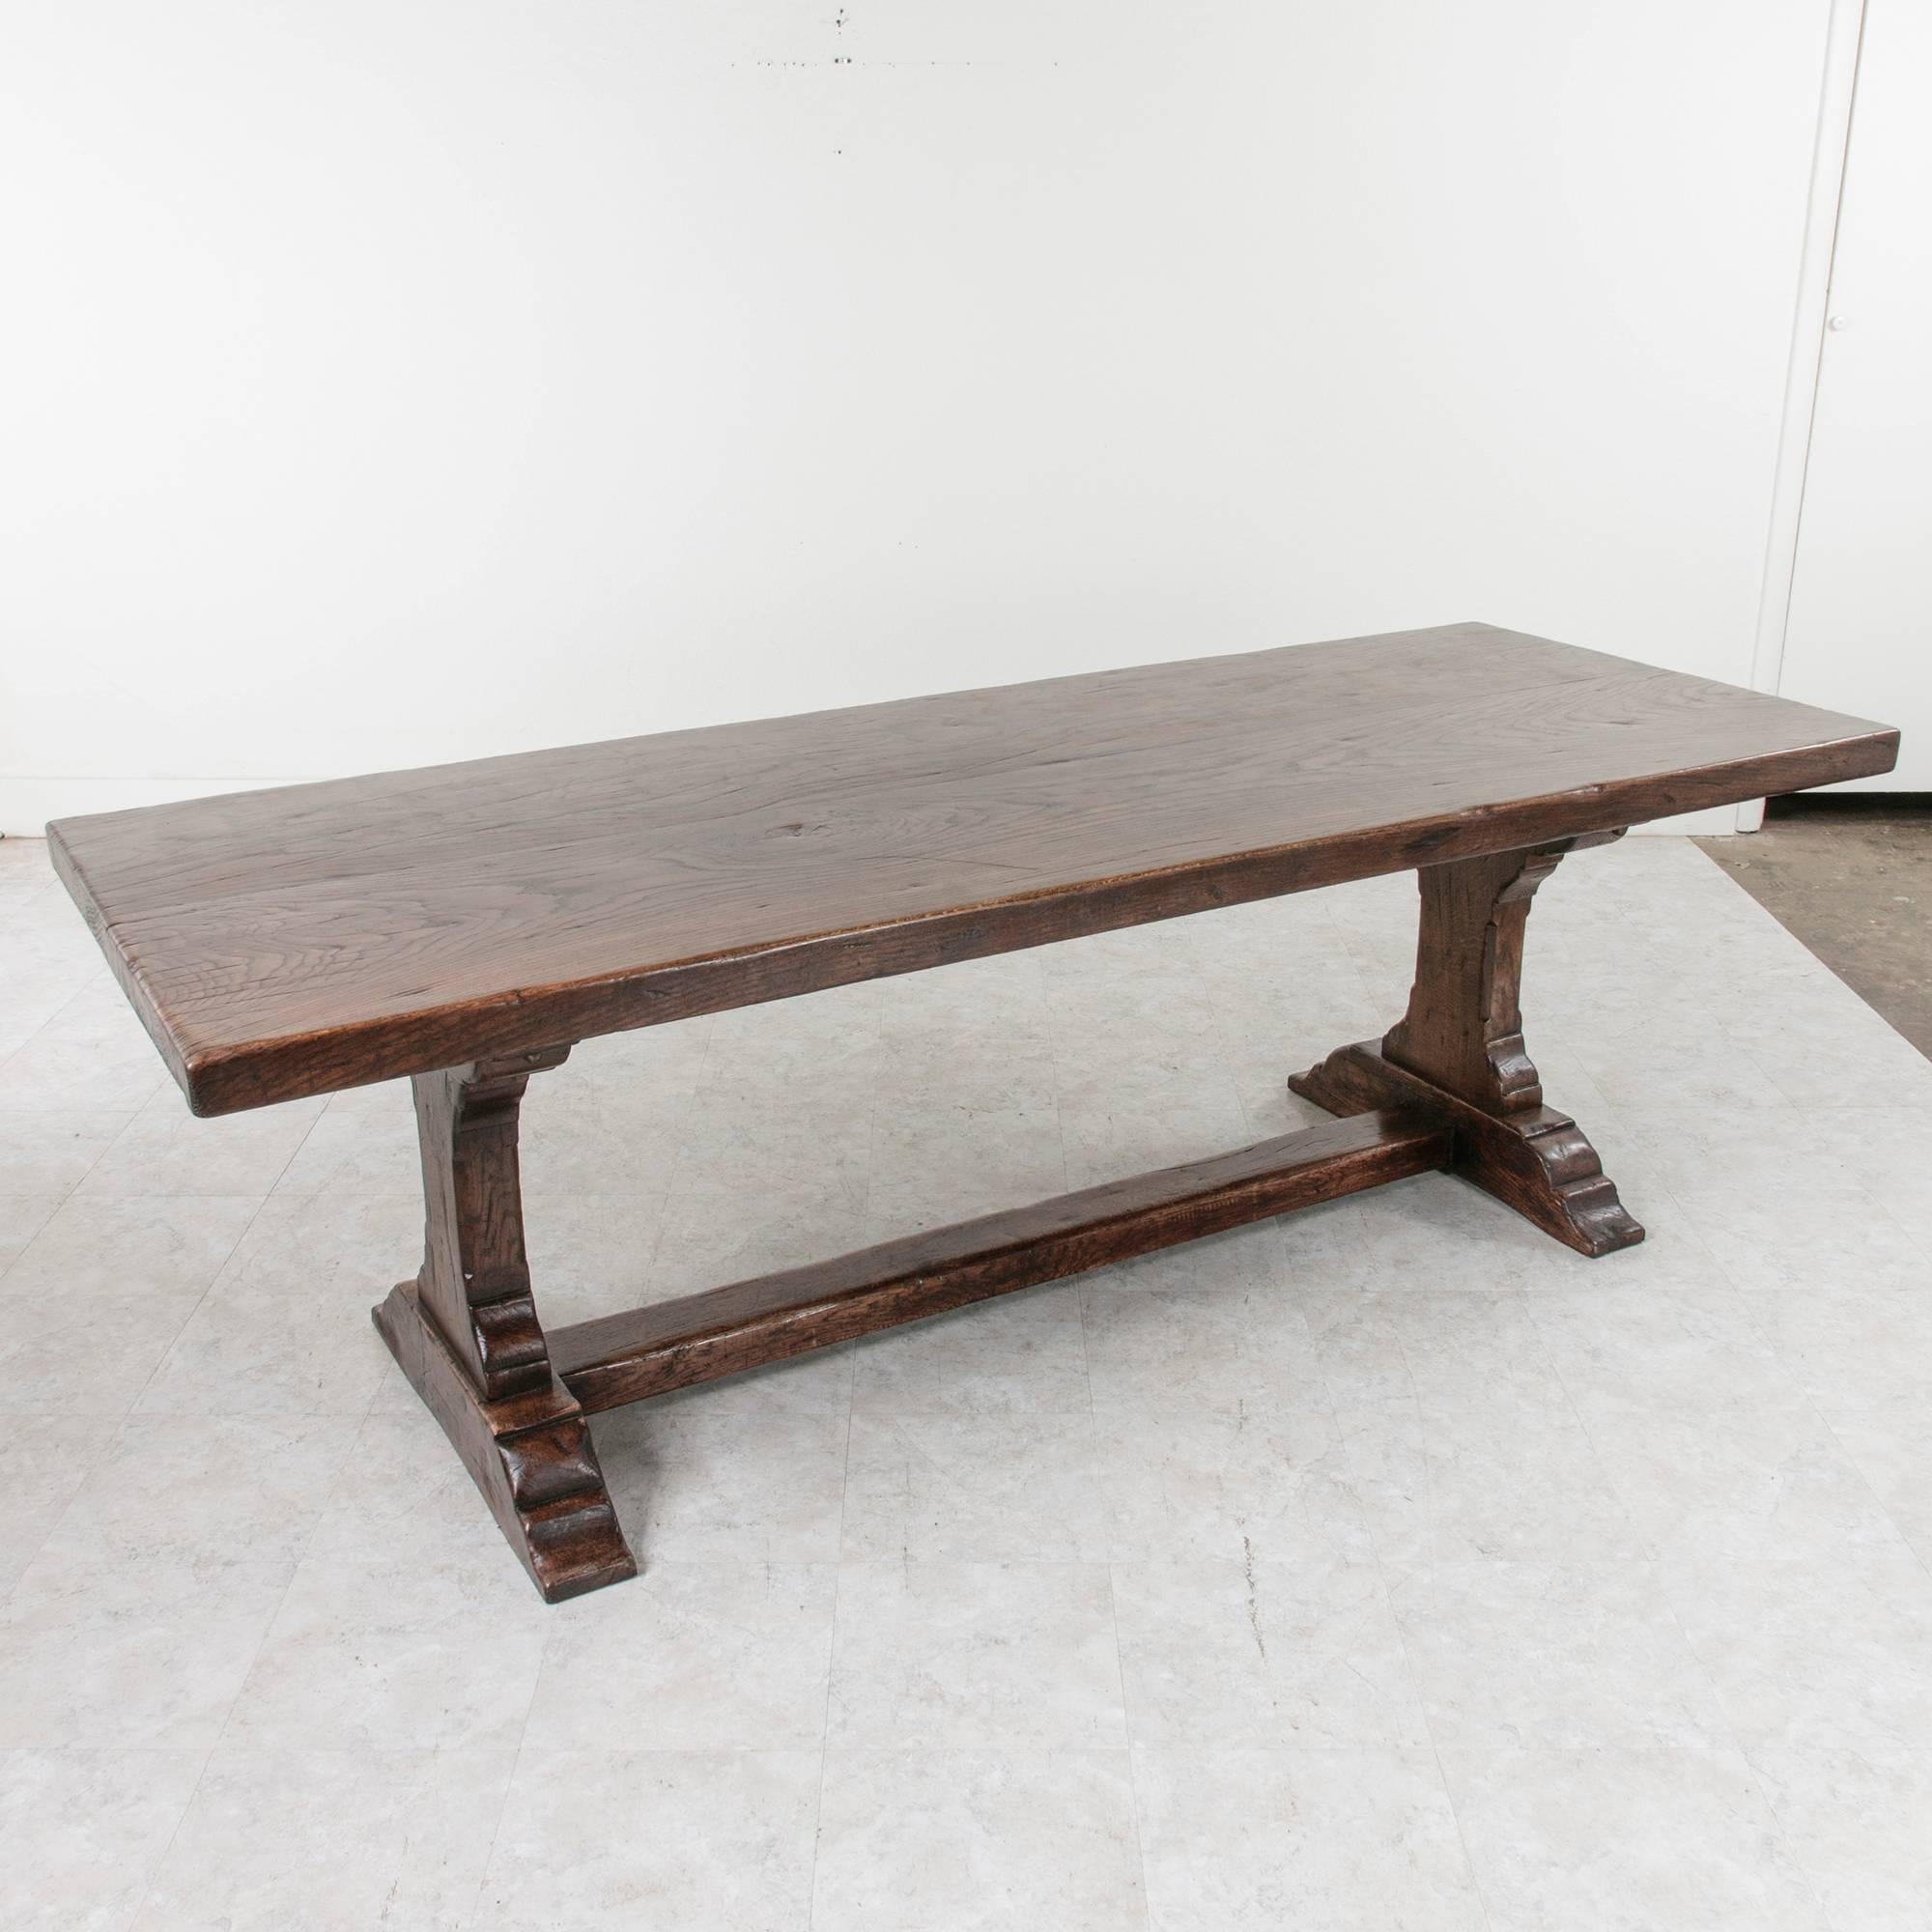 This impressive large hand pegged oak monastery table features a top made of two single 2 1/2